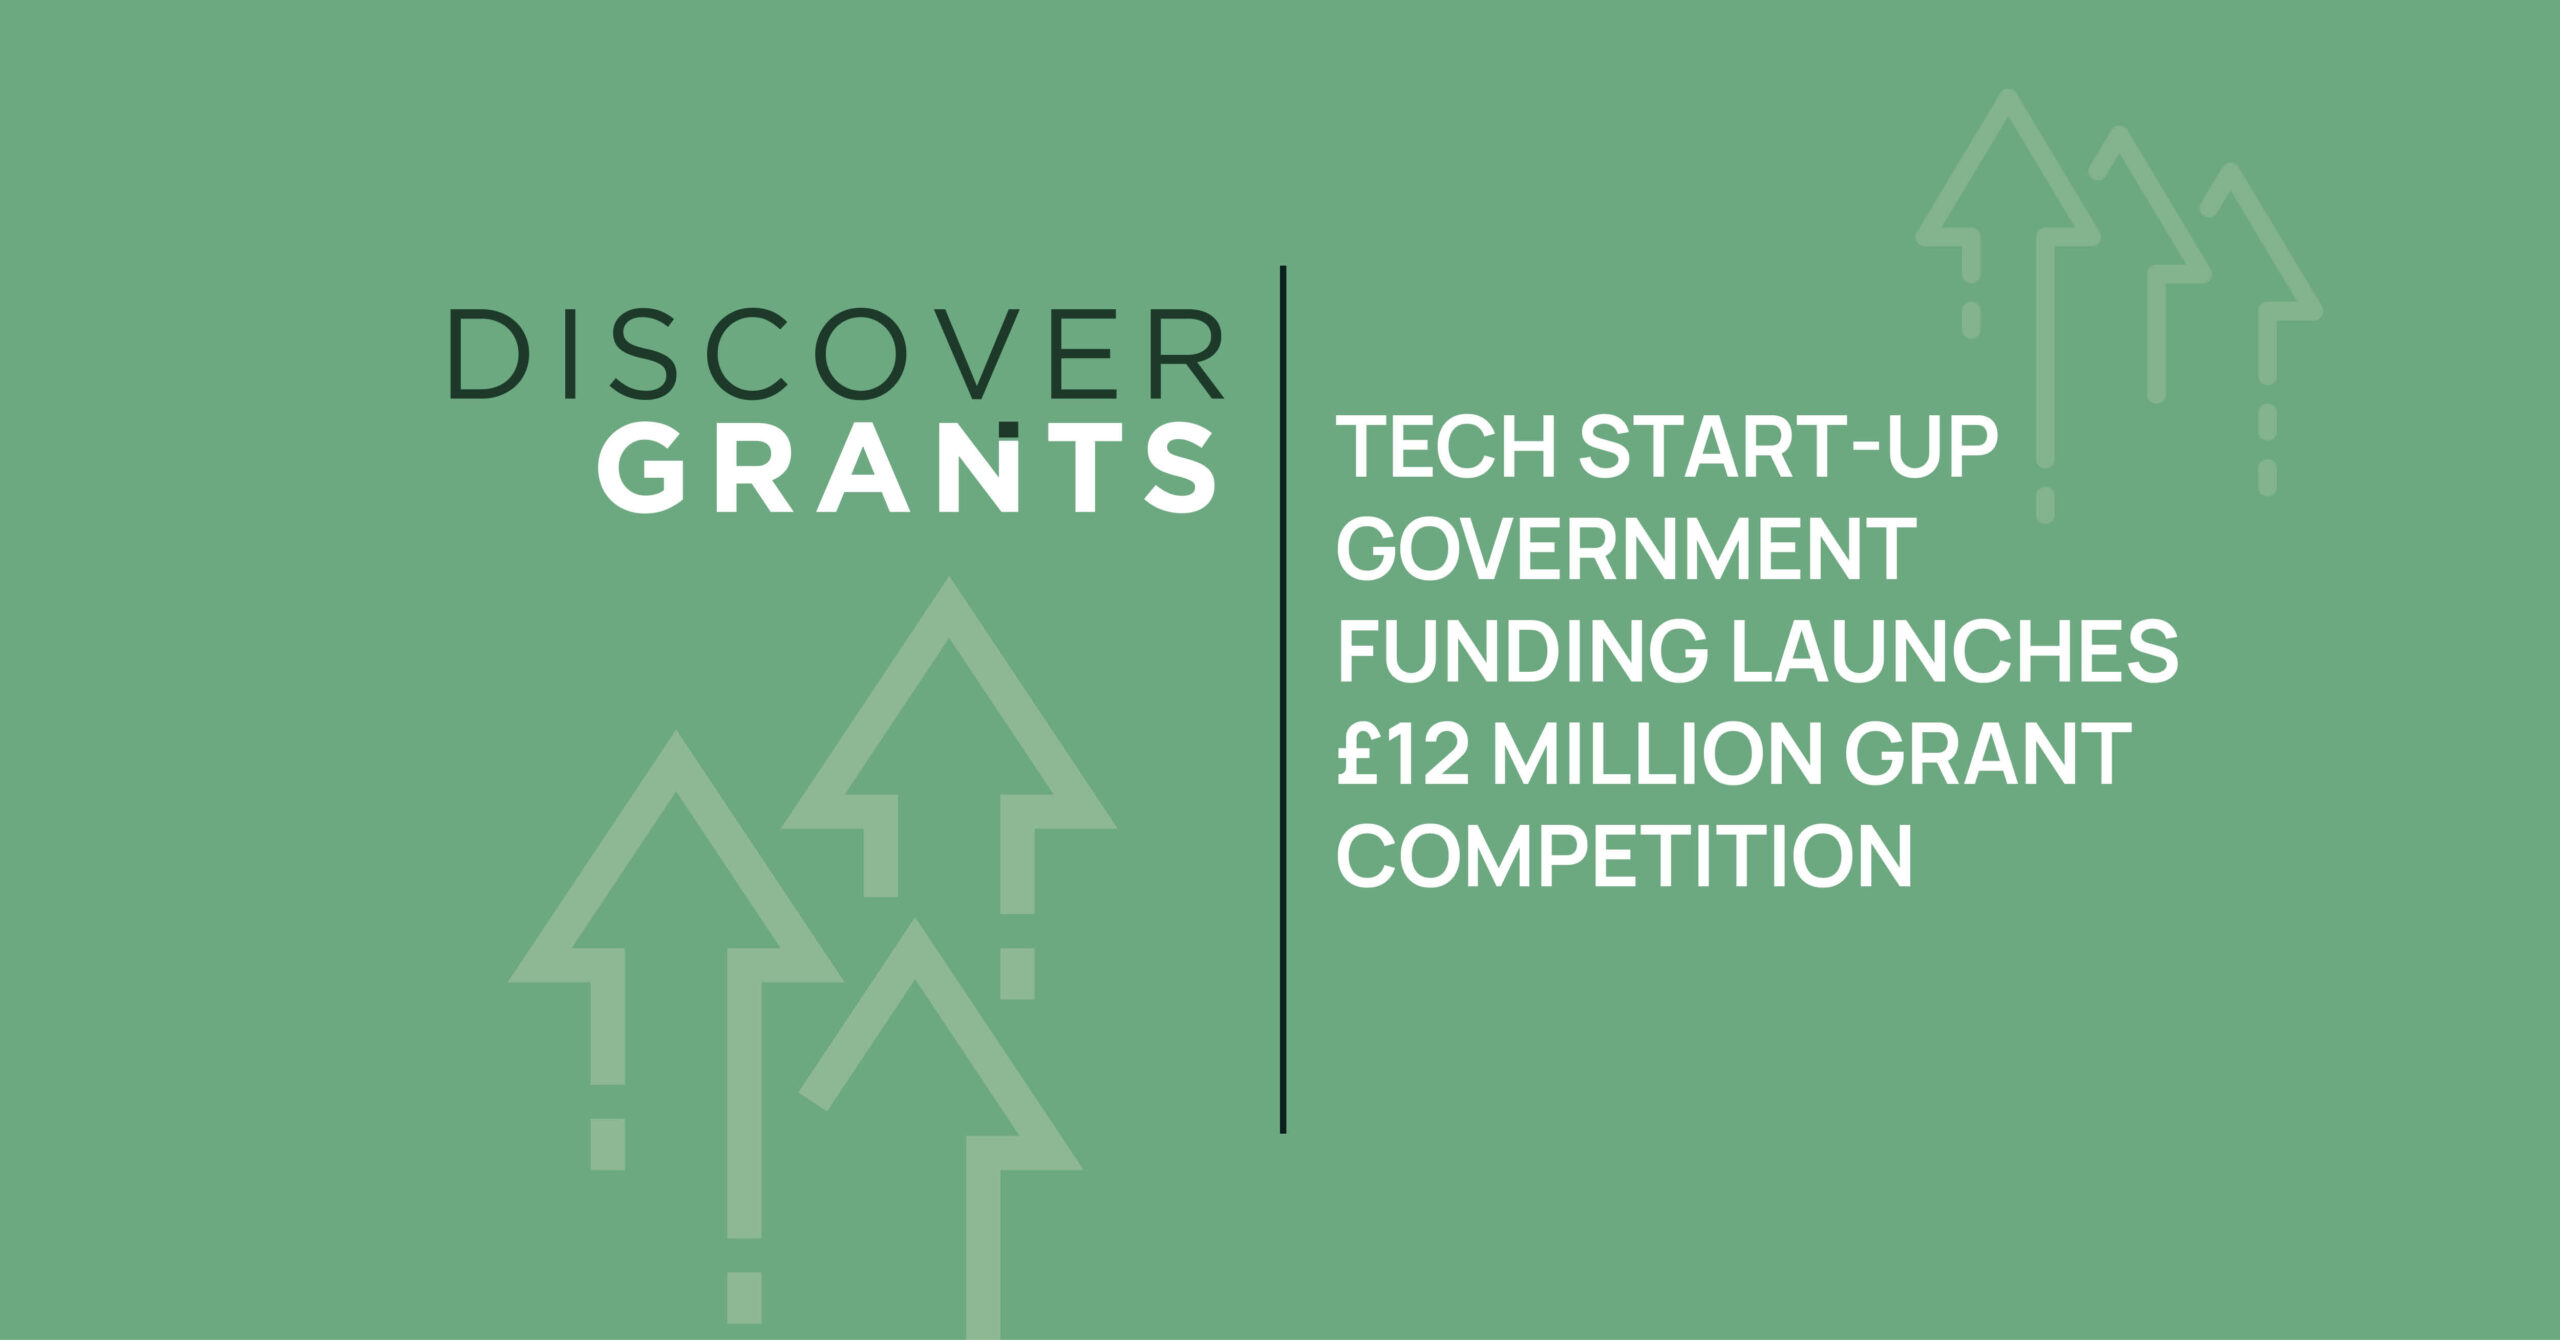 Tech Start-Up Government Funding Launches £12 Million Grant Competition